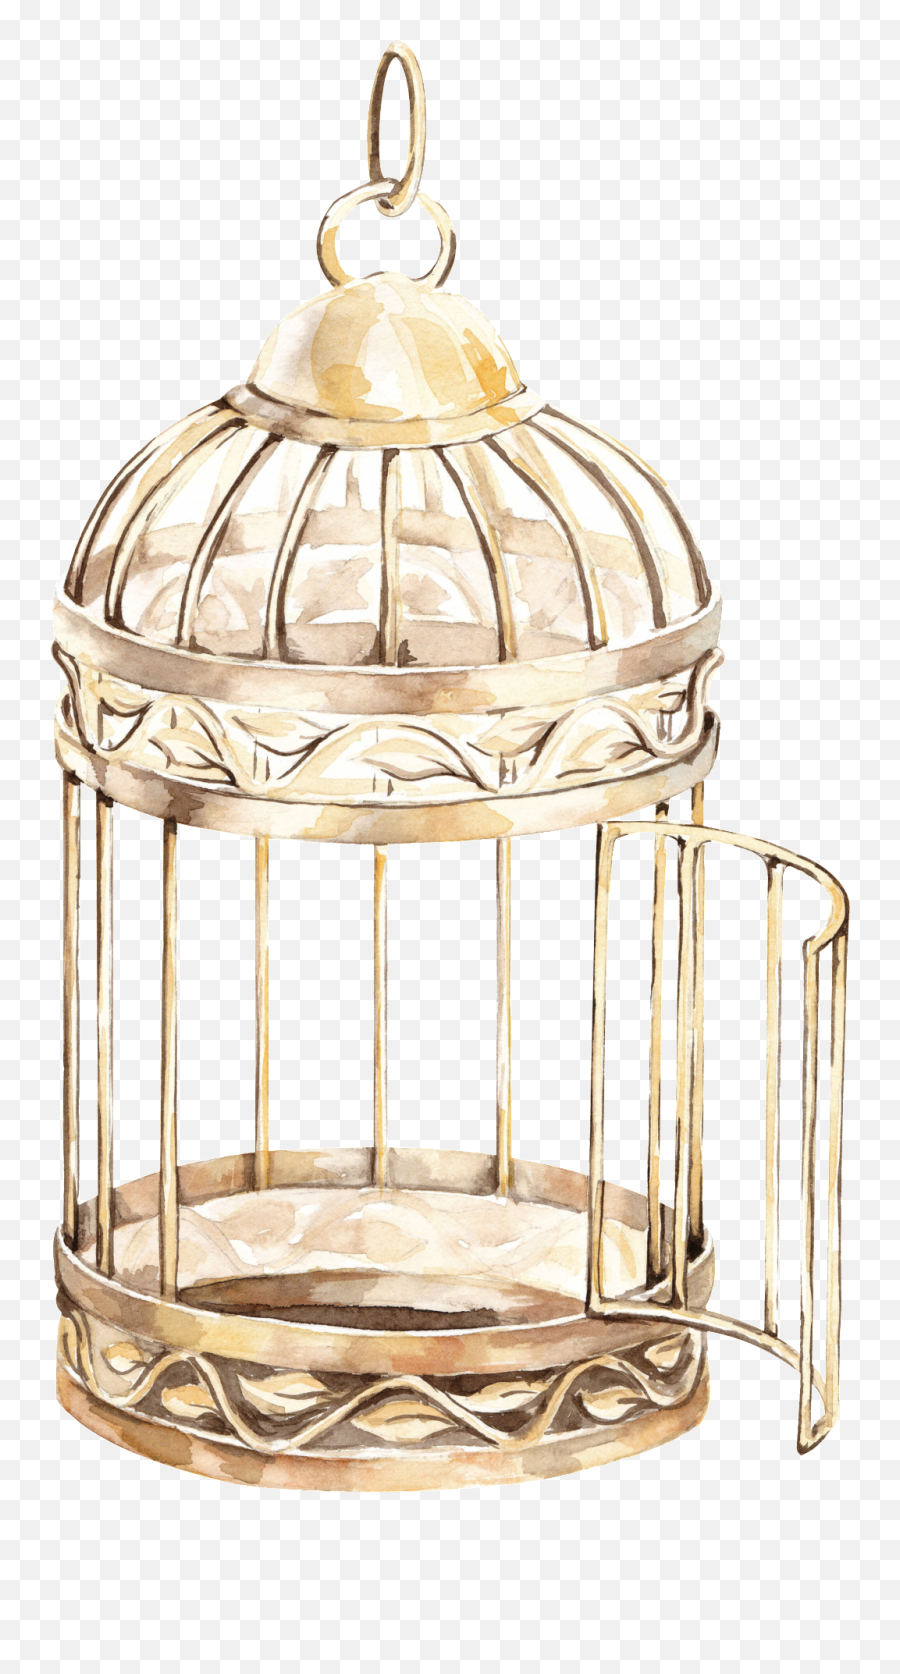 Delicate Bird Cage Transparent - Cage Bird Png Transparent,Cage Transparent Background